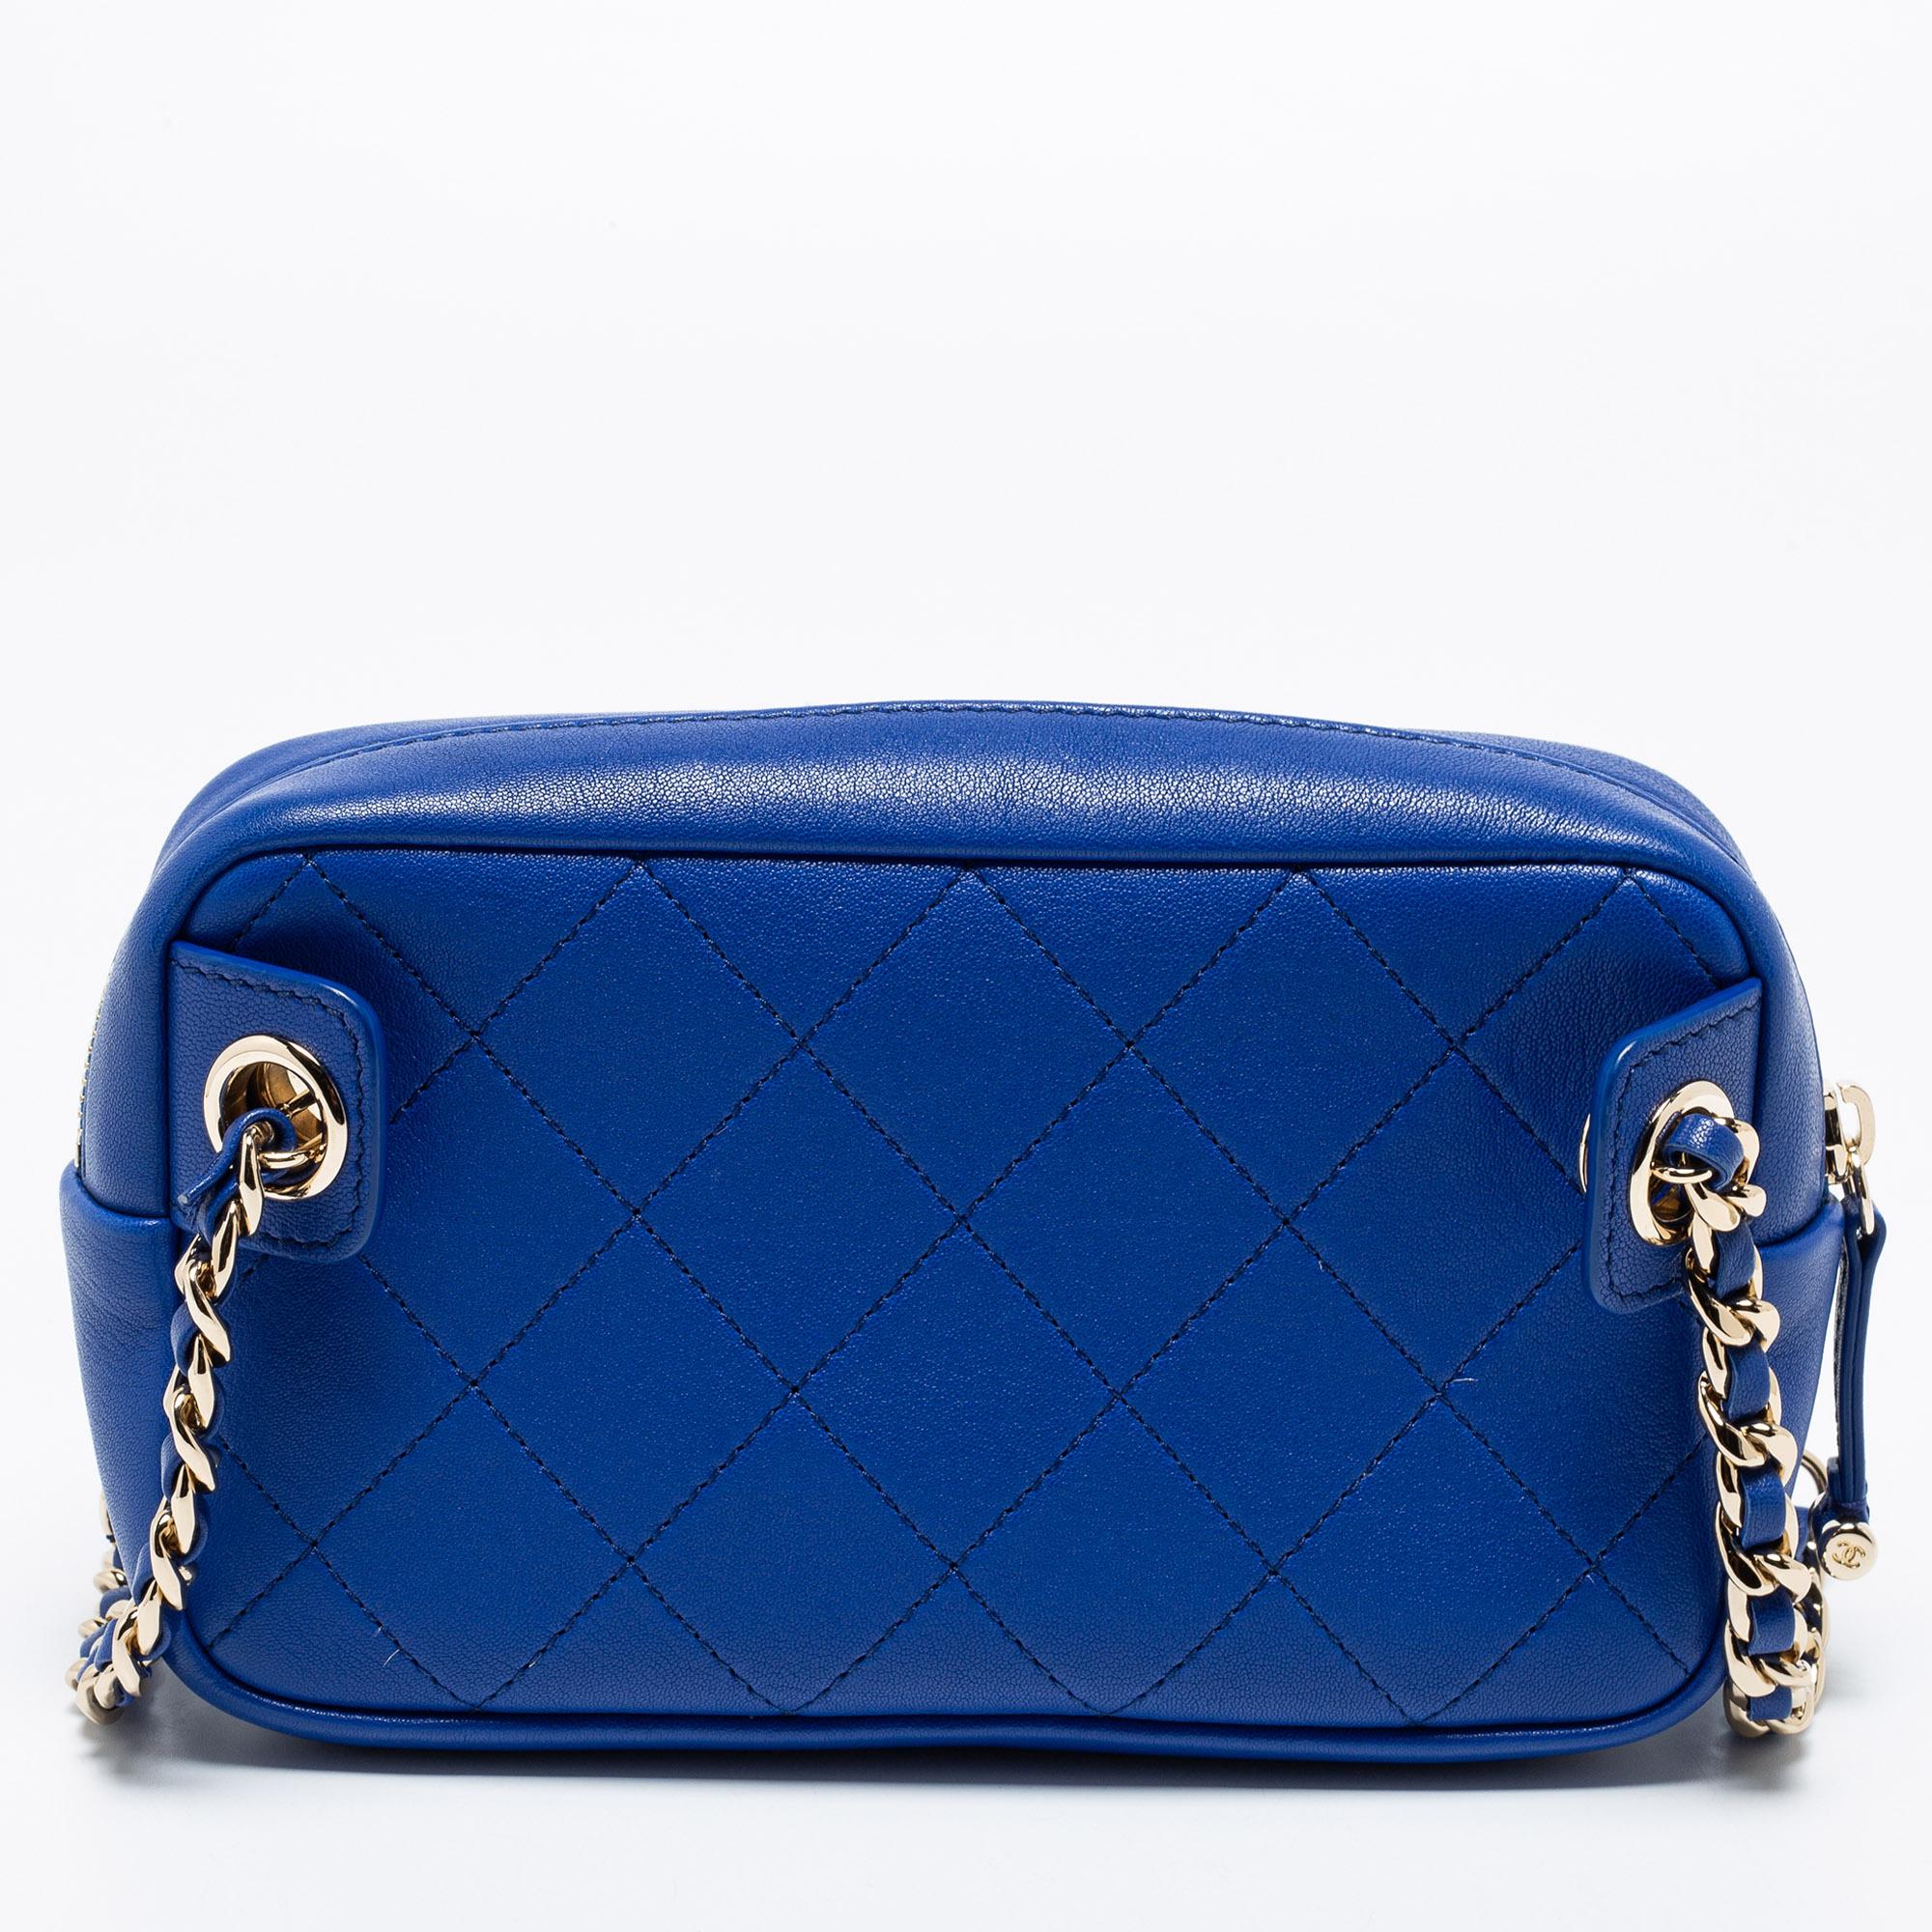 This blue belt bag from Chanel is indeed functional yet fashionable. It is crafted from luxe leather and displays the CC lock on the front in silver tone. It is completed with a zipper and a flap that reveals fabric insides. Wear it over jumpsuits